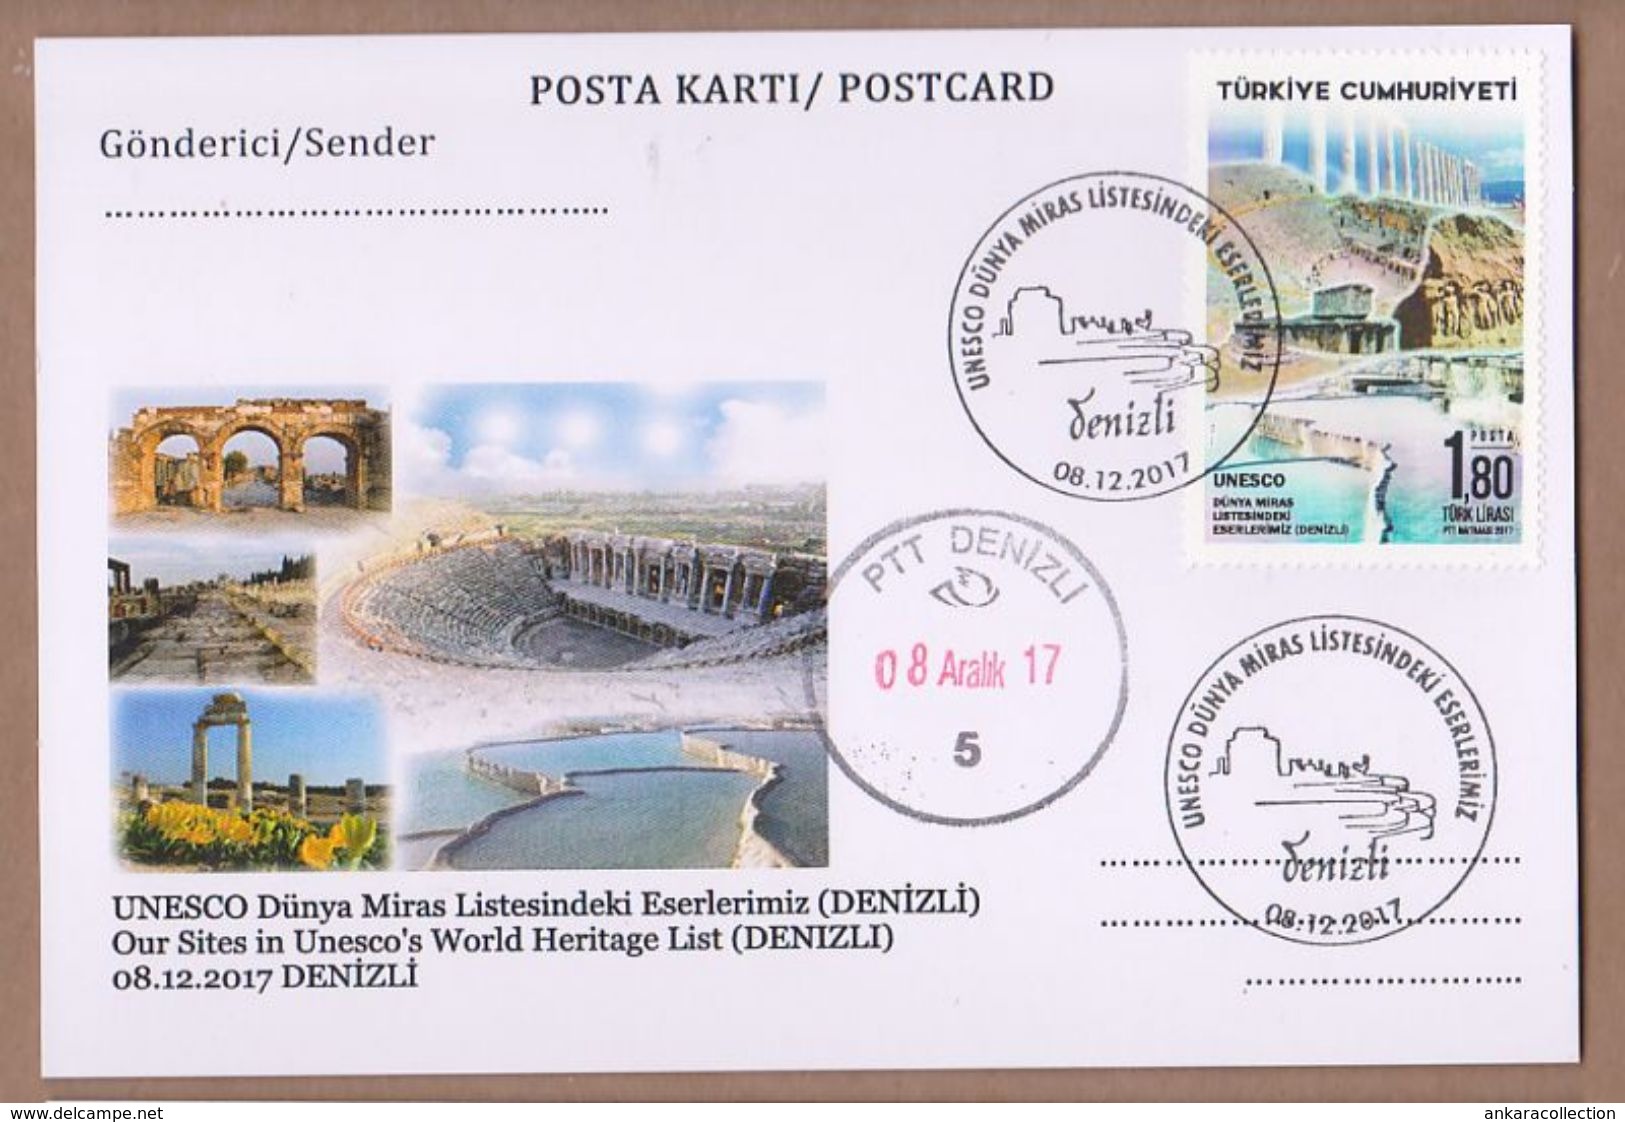 AC - TURKEY POSTAL STATIONARY - OUR SITES IN UNECO'S WORLD HERITAGE LIST 08 DECEMBER 2017 - Postal Stationery